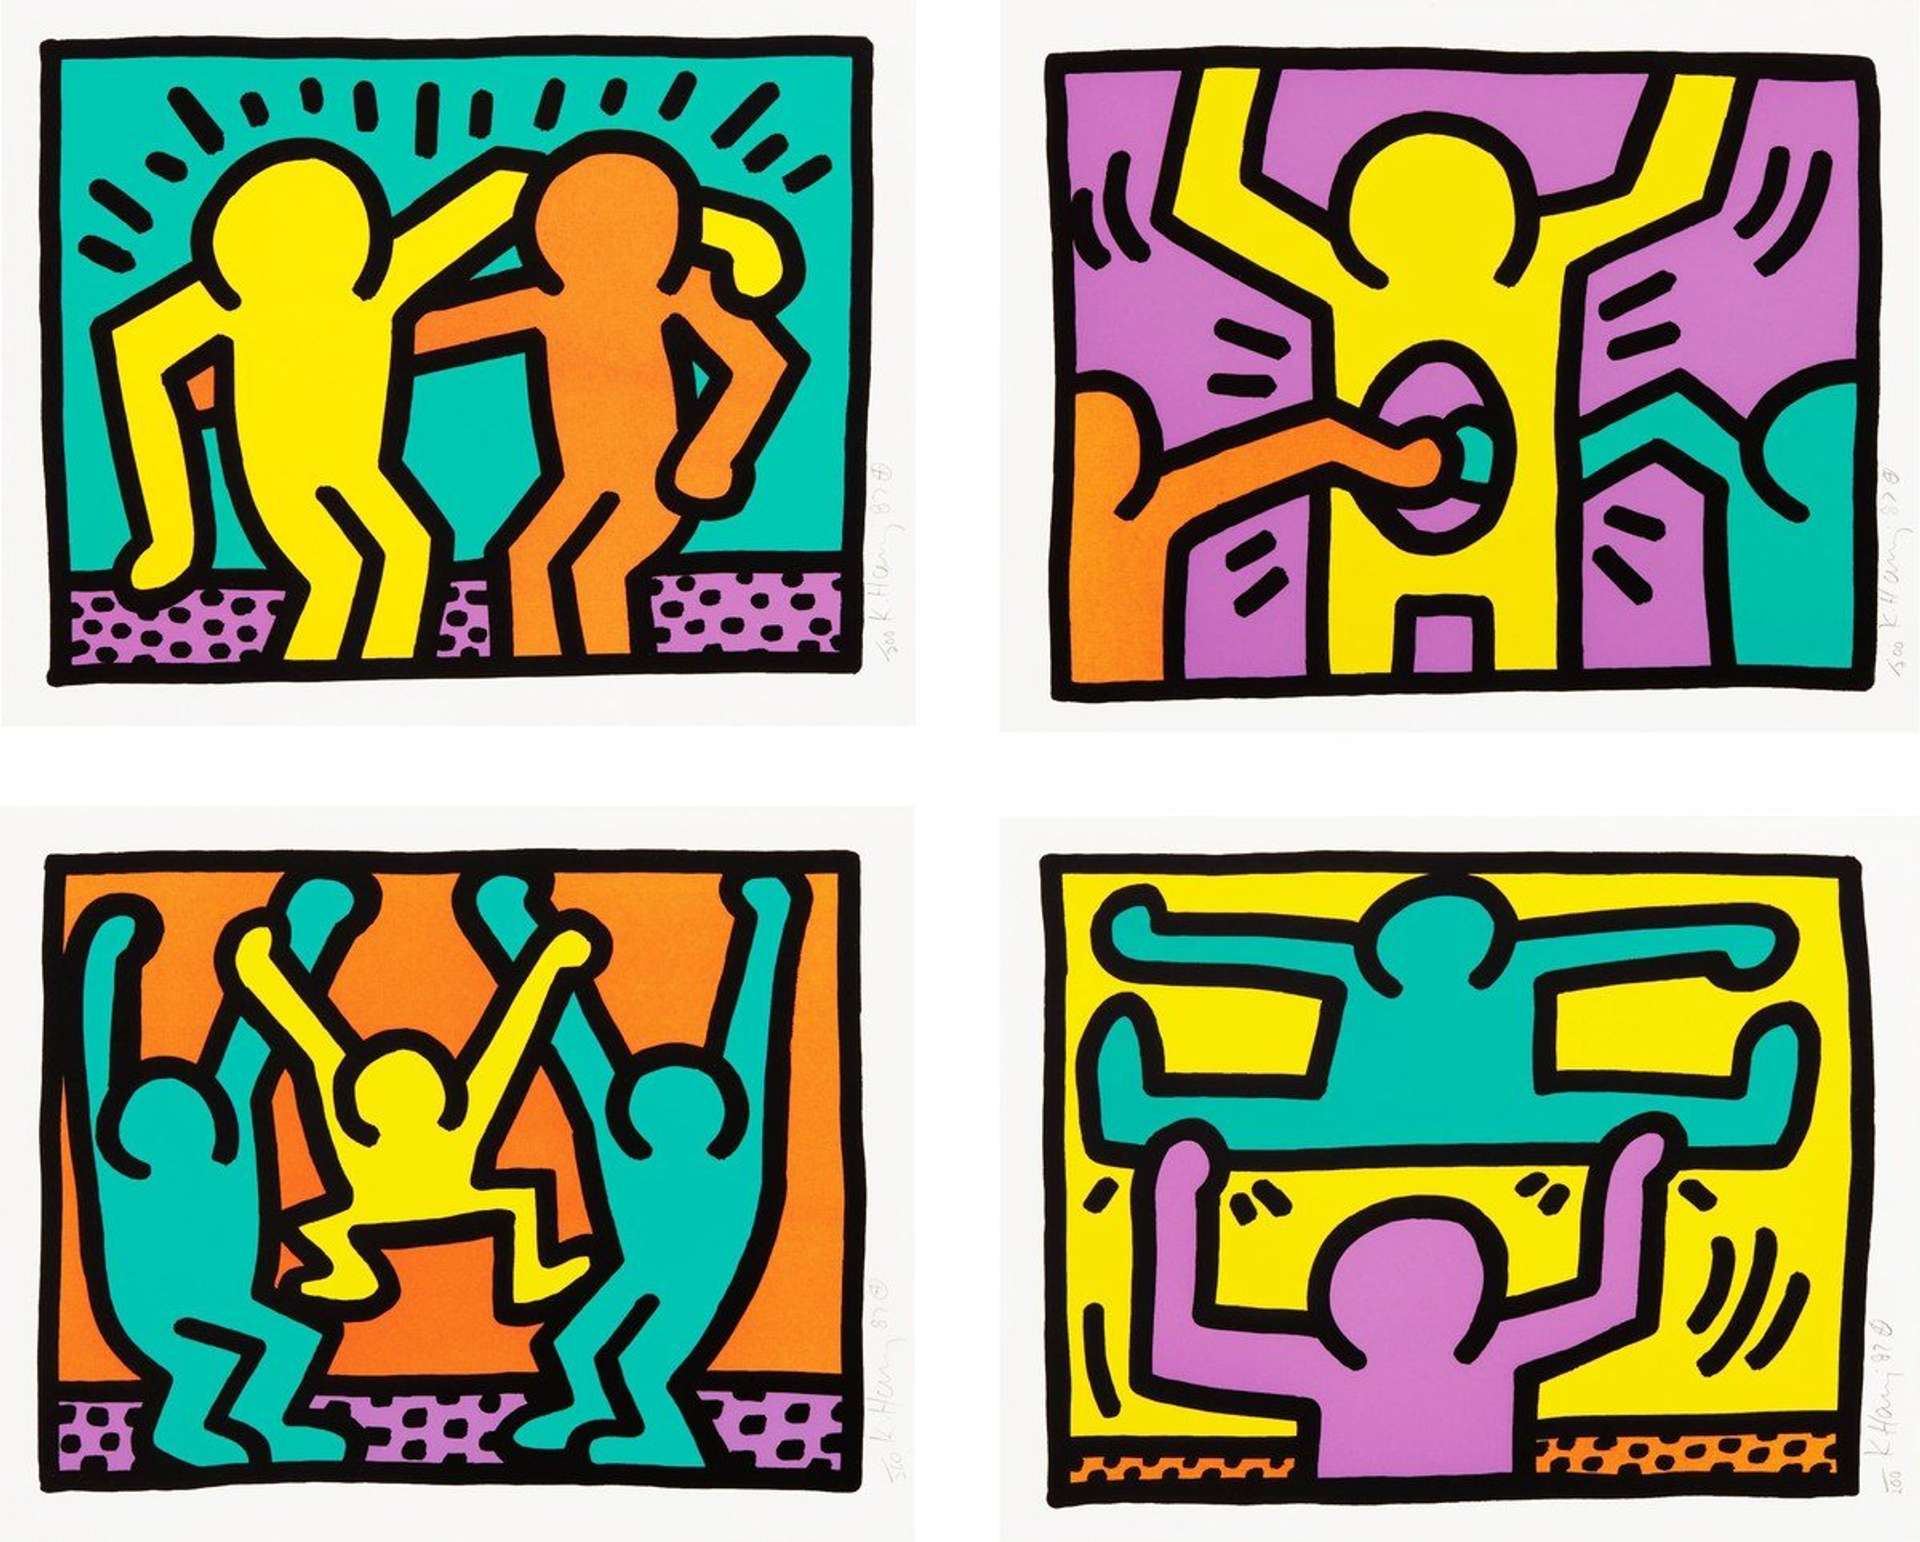 10 Facts About Keith Haring's Pop Shop